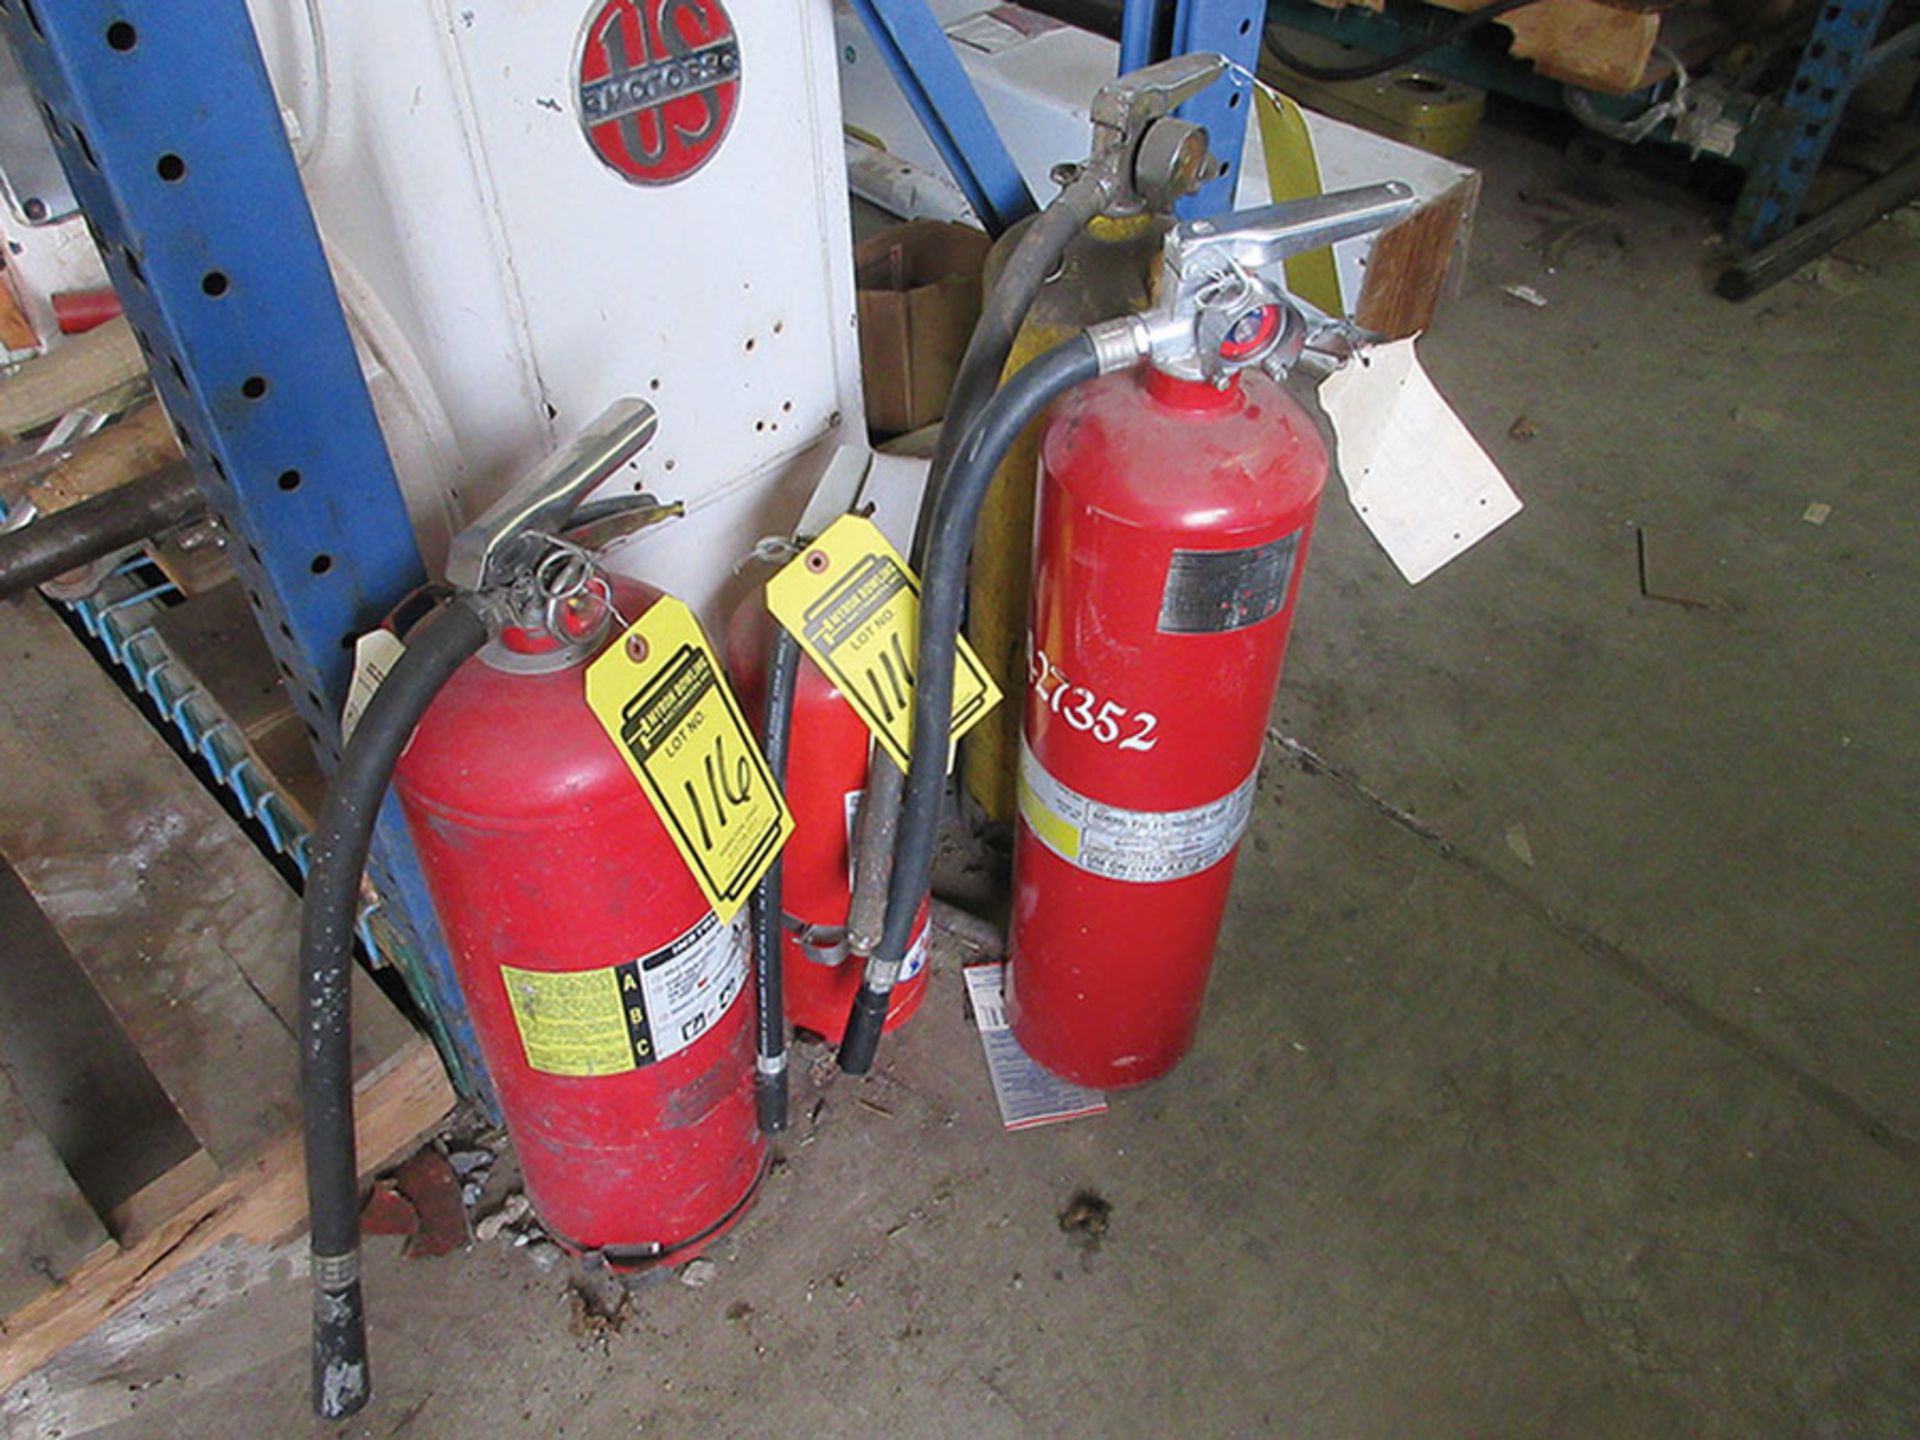 (3) SETS OF STOCKROOM STAIRS: 9 1/2', 4 1/2' & 2 1/2' WORKING HEIGHTS, FIRE EXTINGUISHERS & (2) SHOP